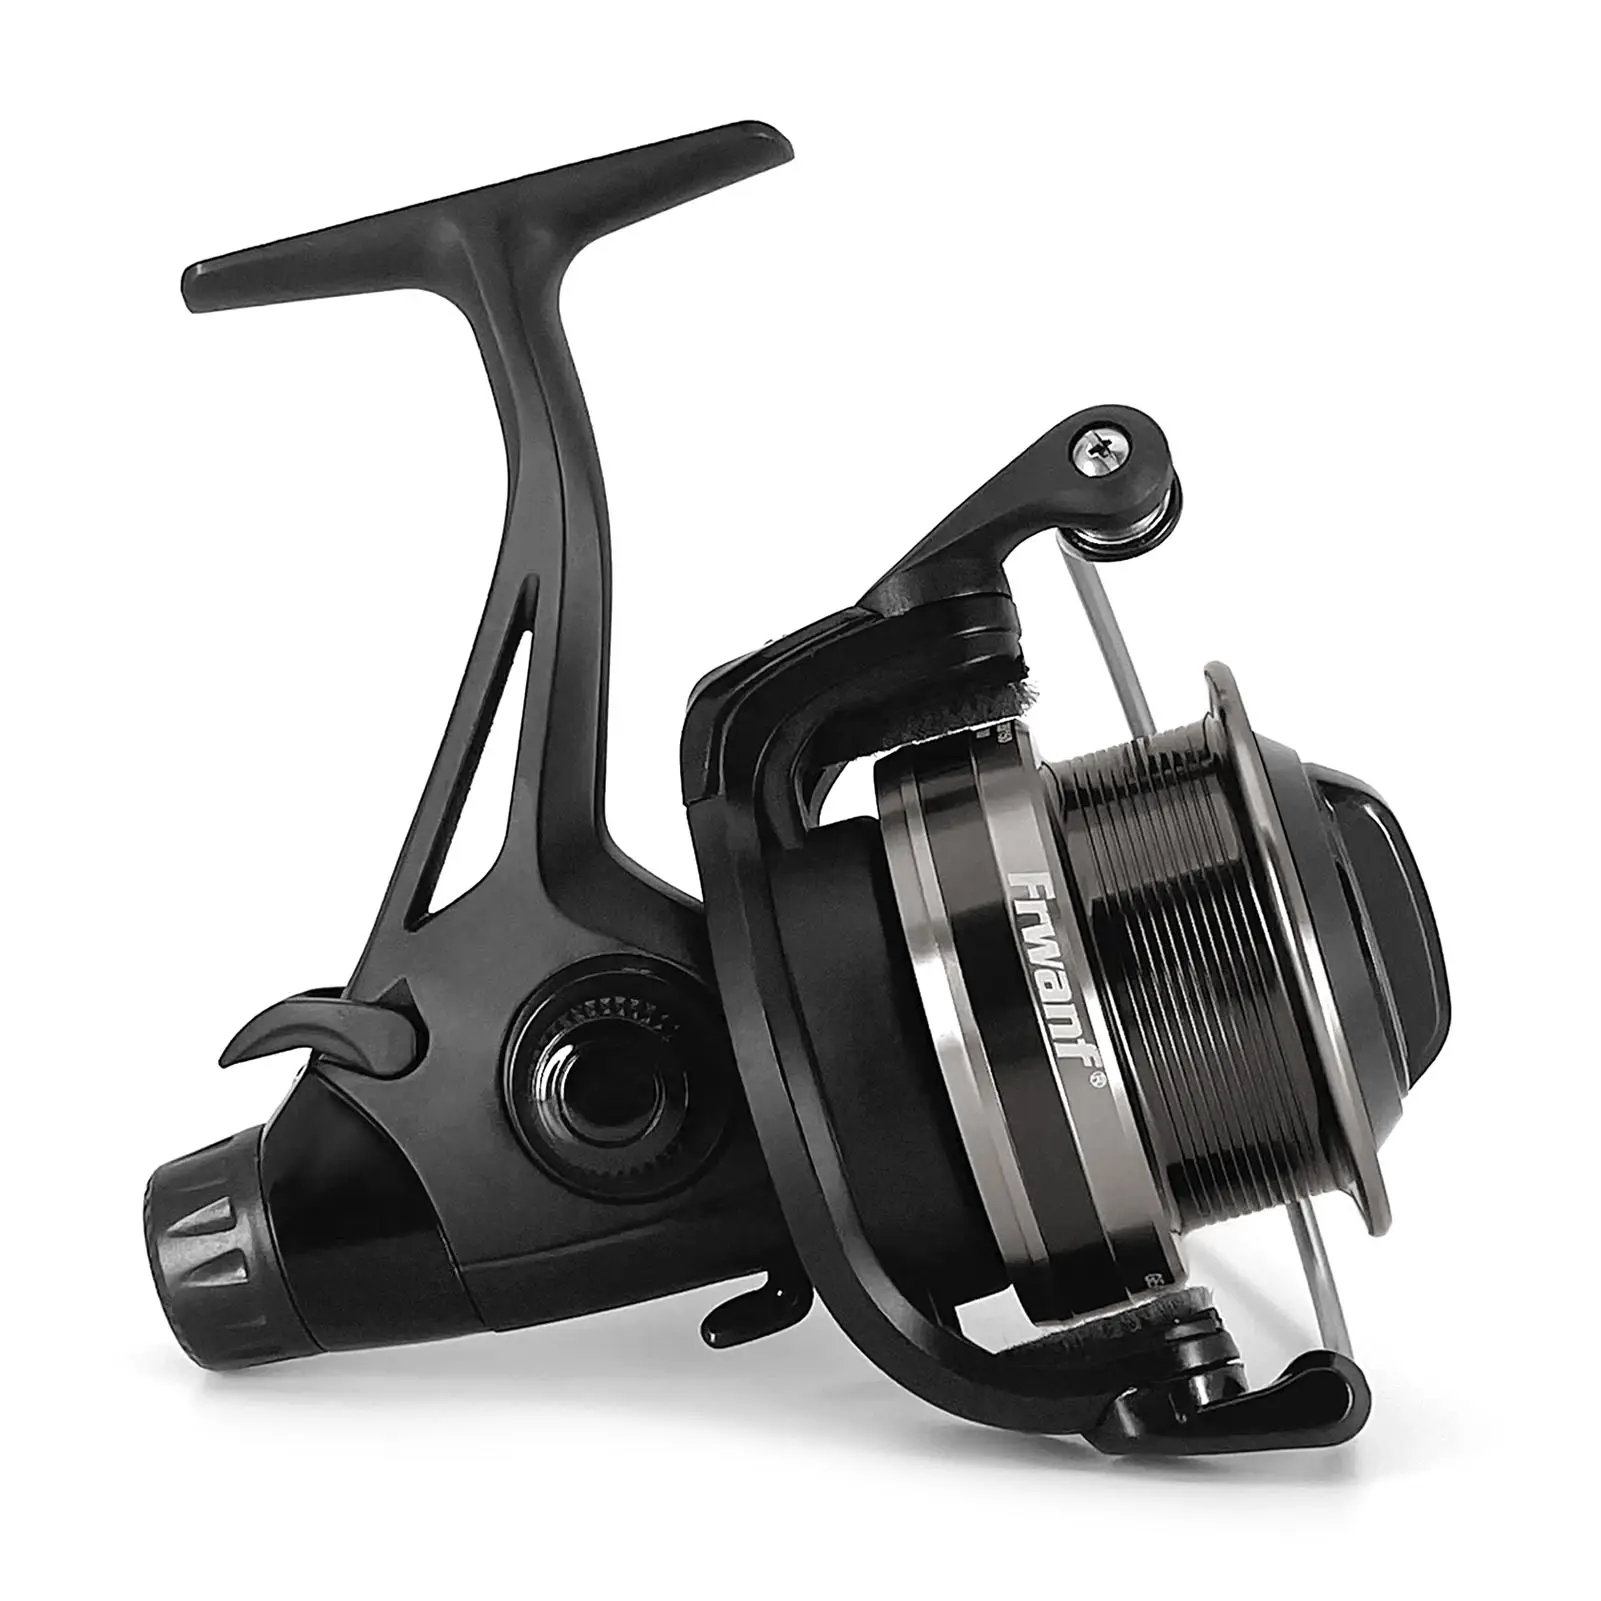 Frwanf De Pesca Fishing Reels Double Loading Spinning Wheel Surfcasting 4000 5000 Fish Tackle Peche Metal Baitcasting Reel